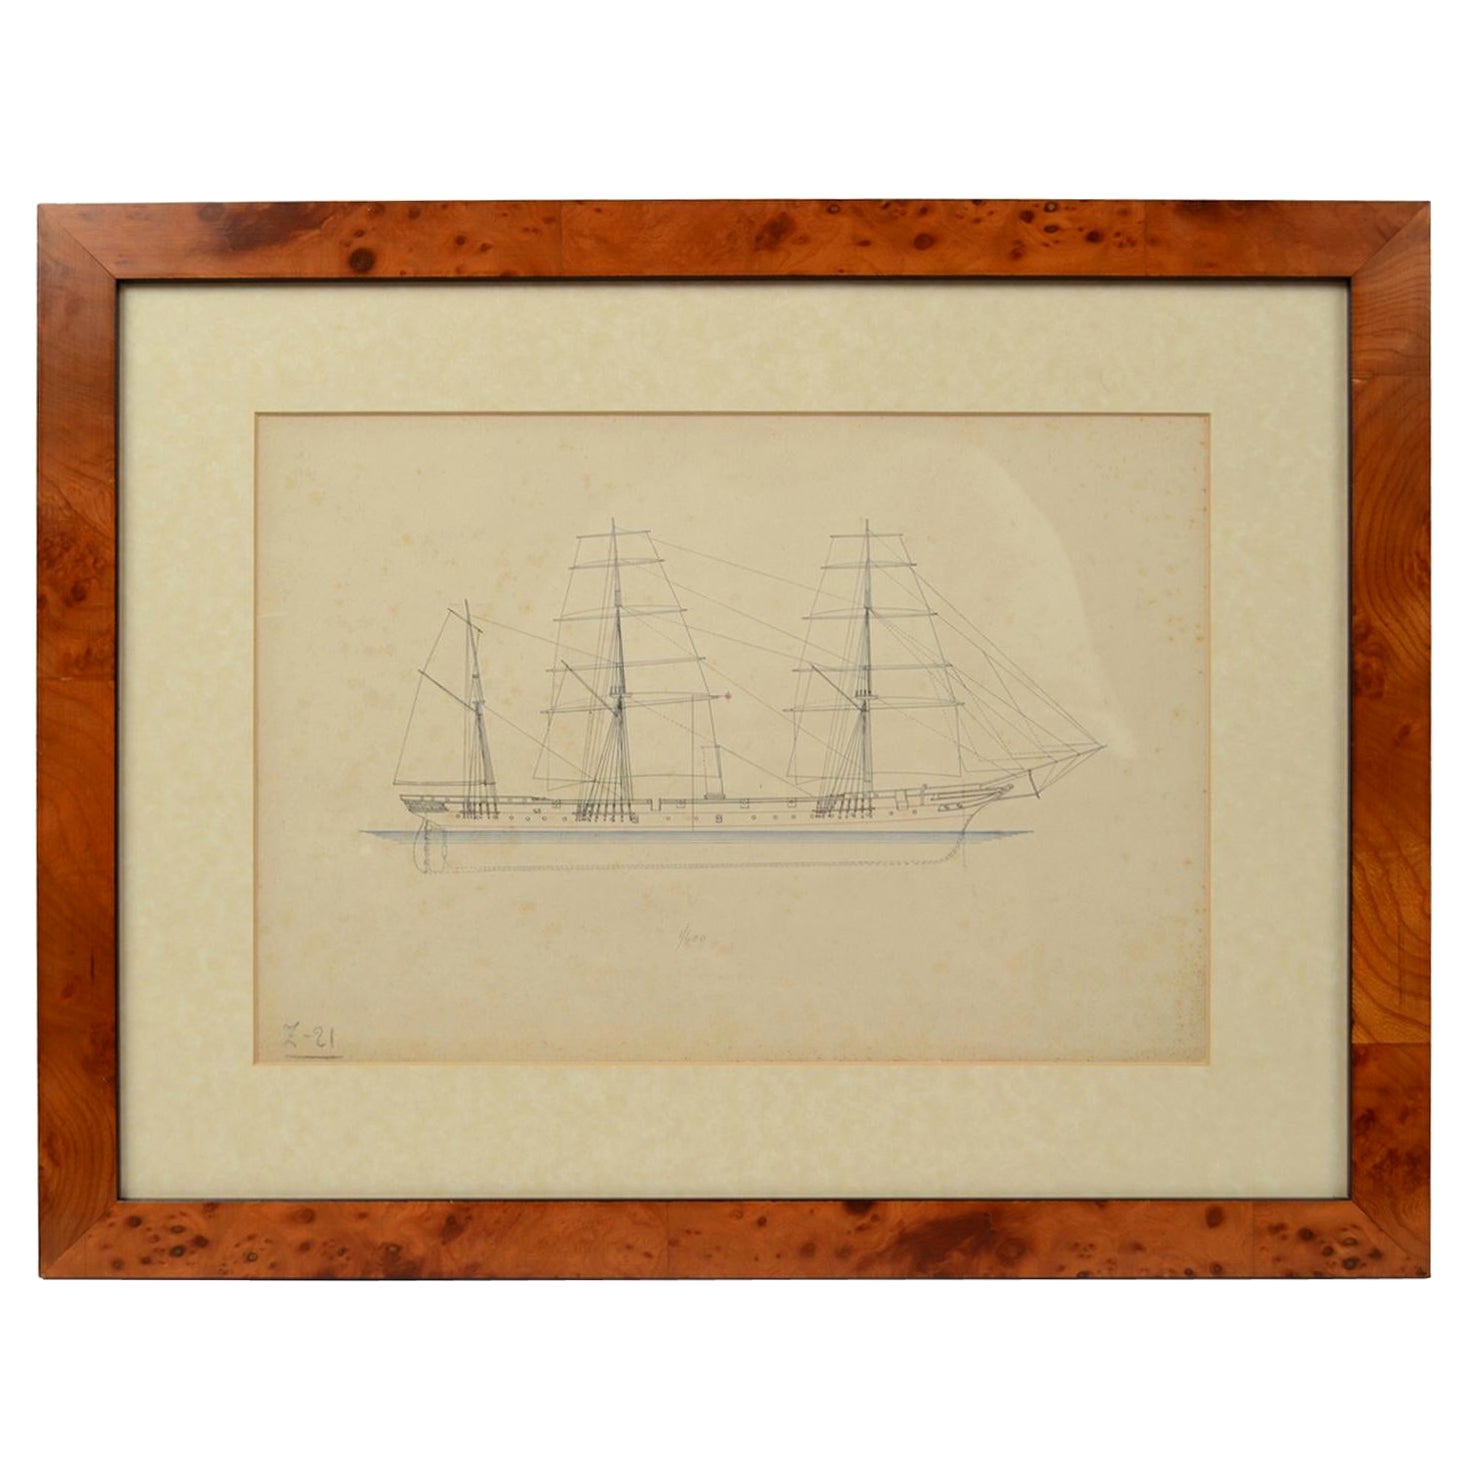 Print No. 1 of 400 Depicting a Nautical Schooner Made in the Mid-19th Century